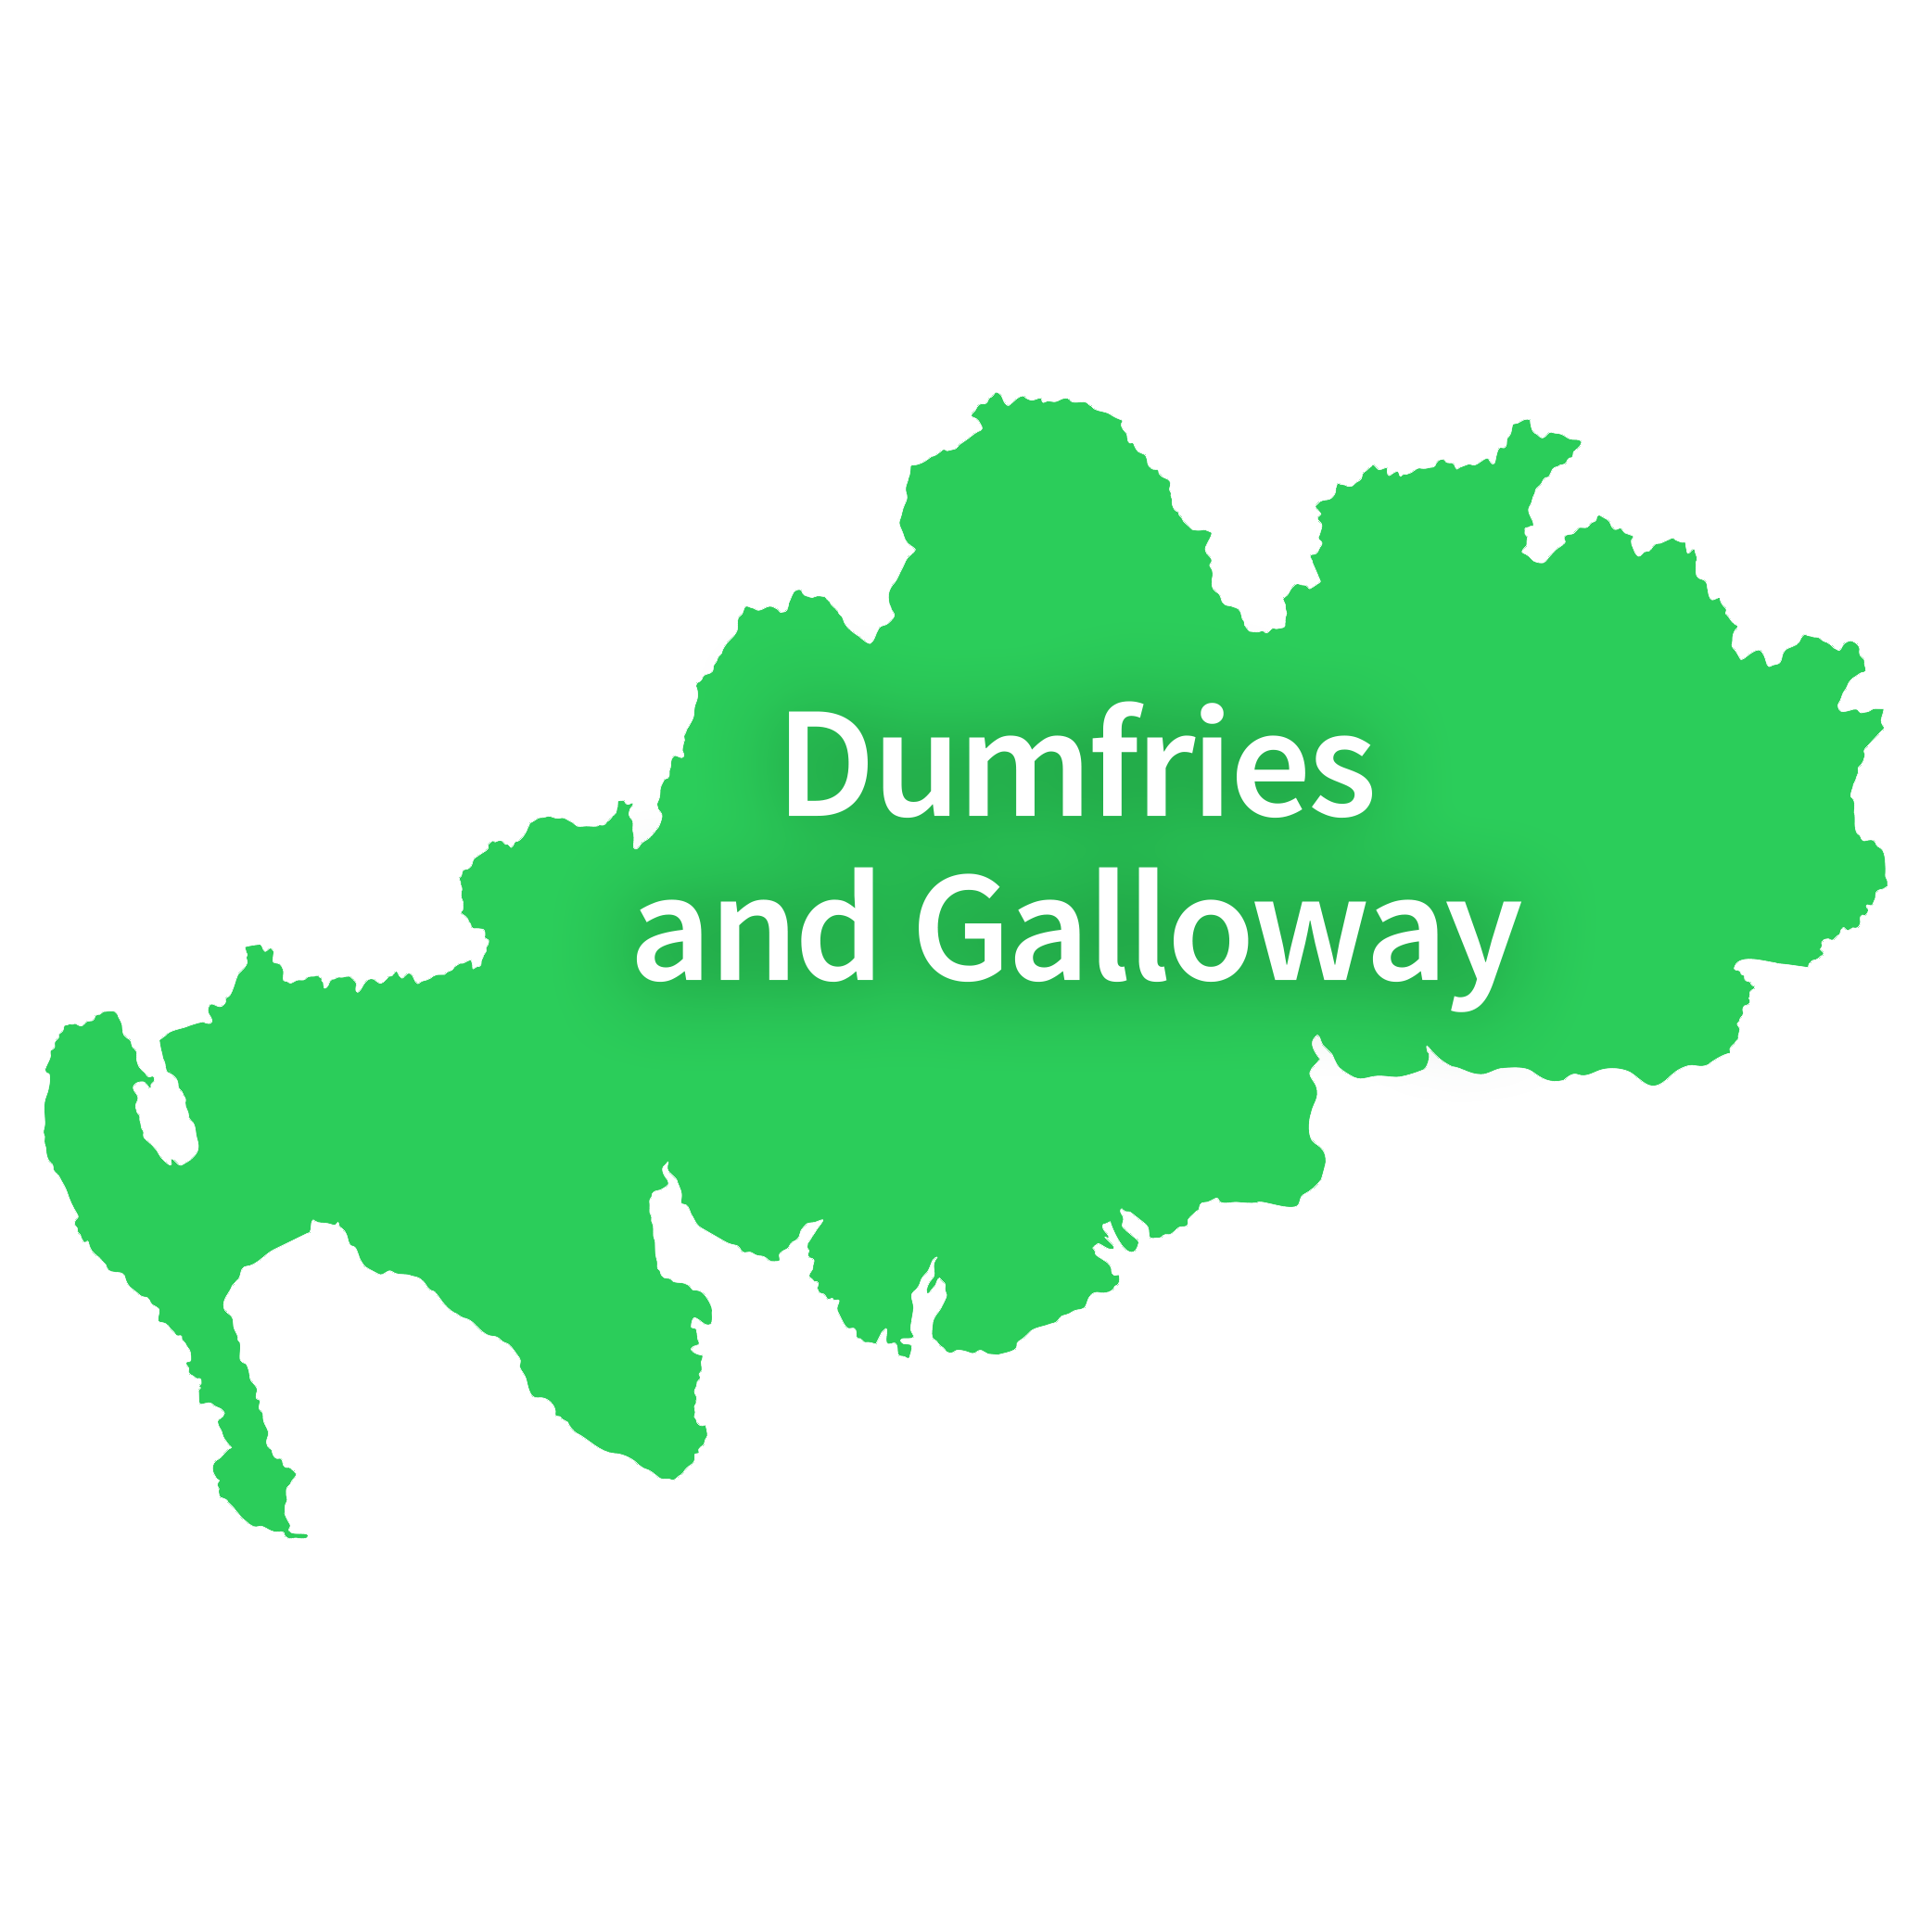 Map of Dumfries and Galloway